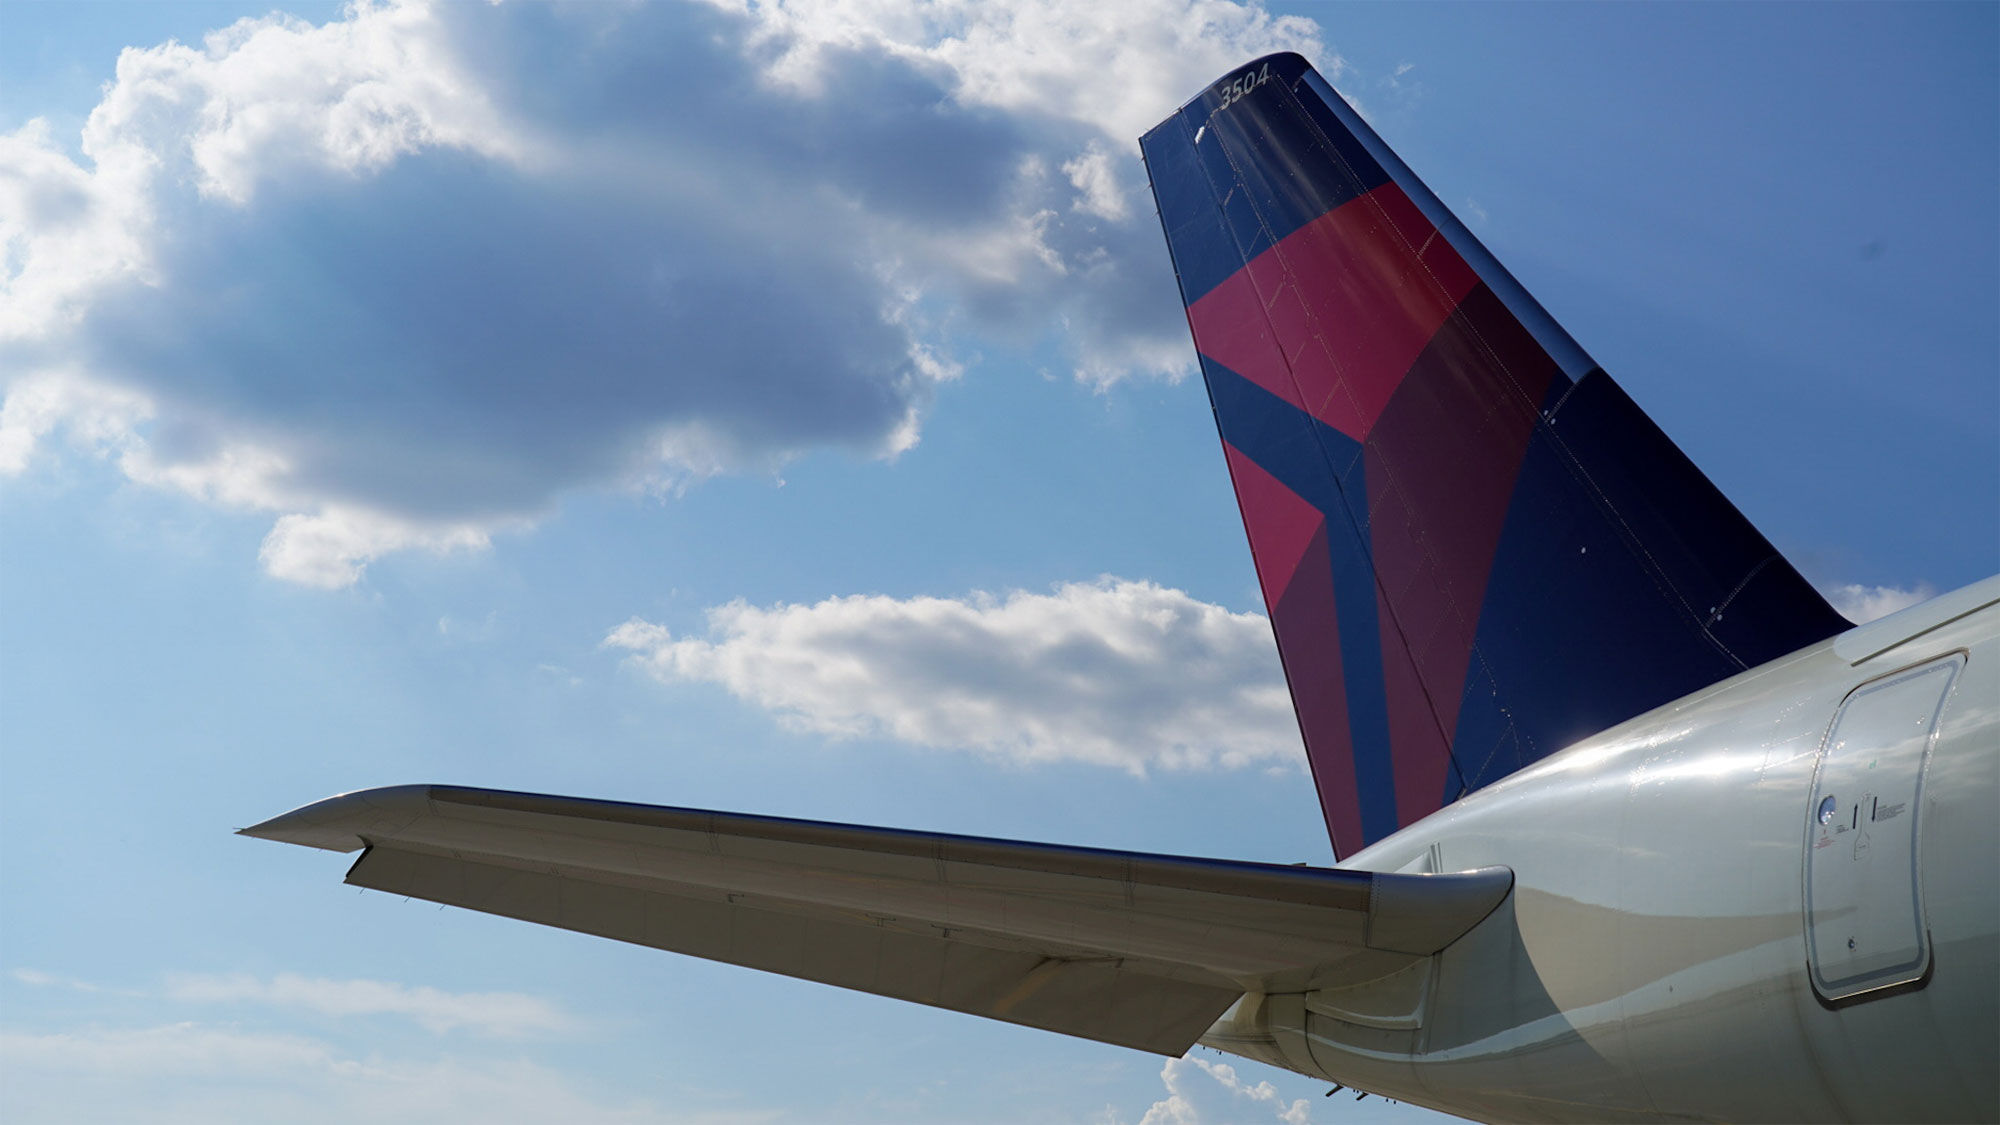 Delta is trimming summer schedule by 100 flights per day: Travel Weekly